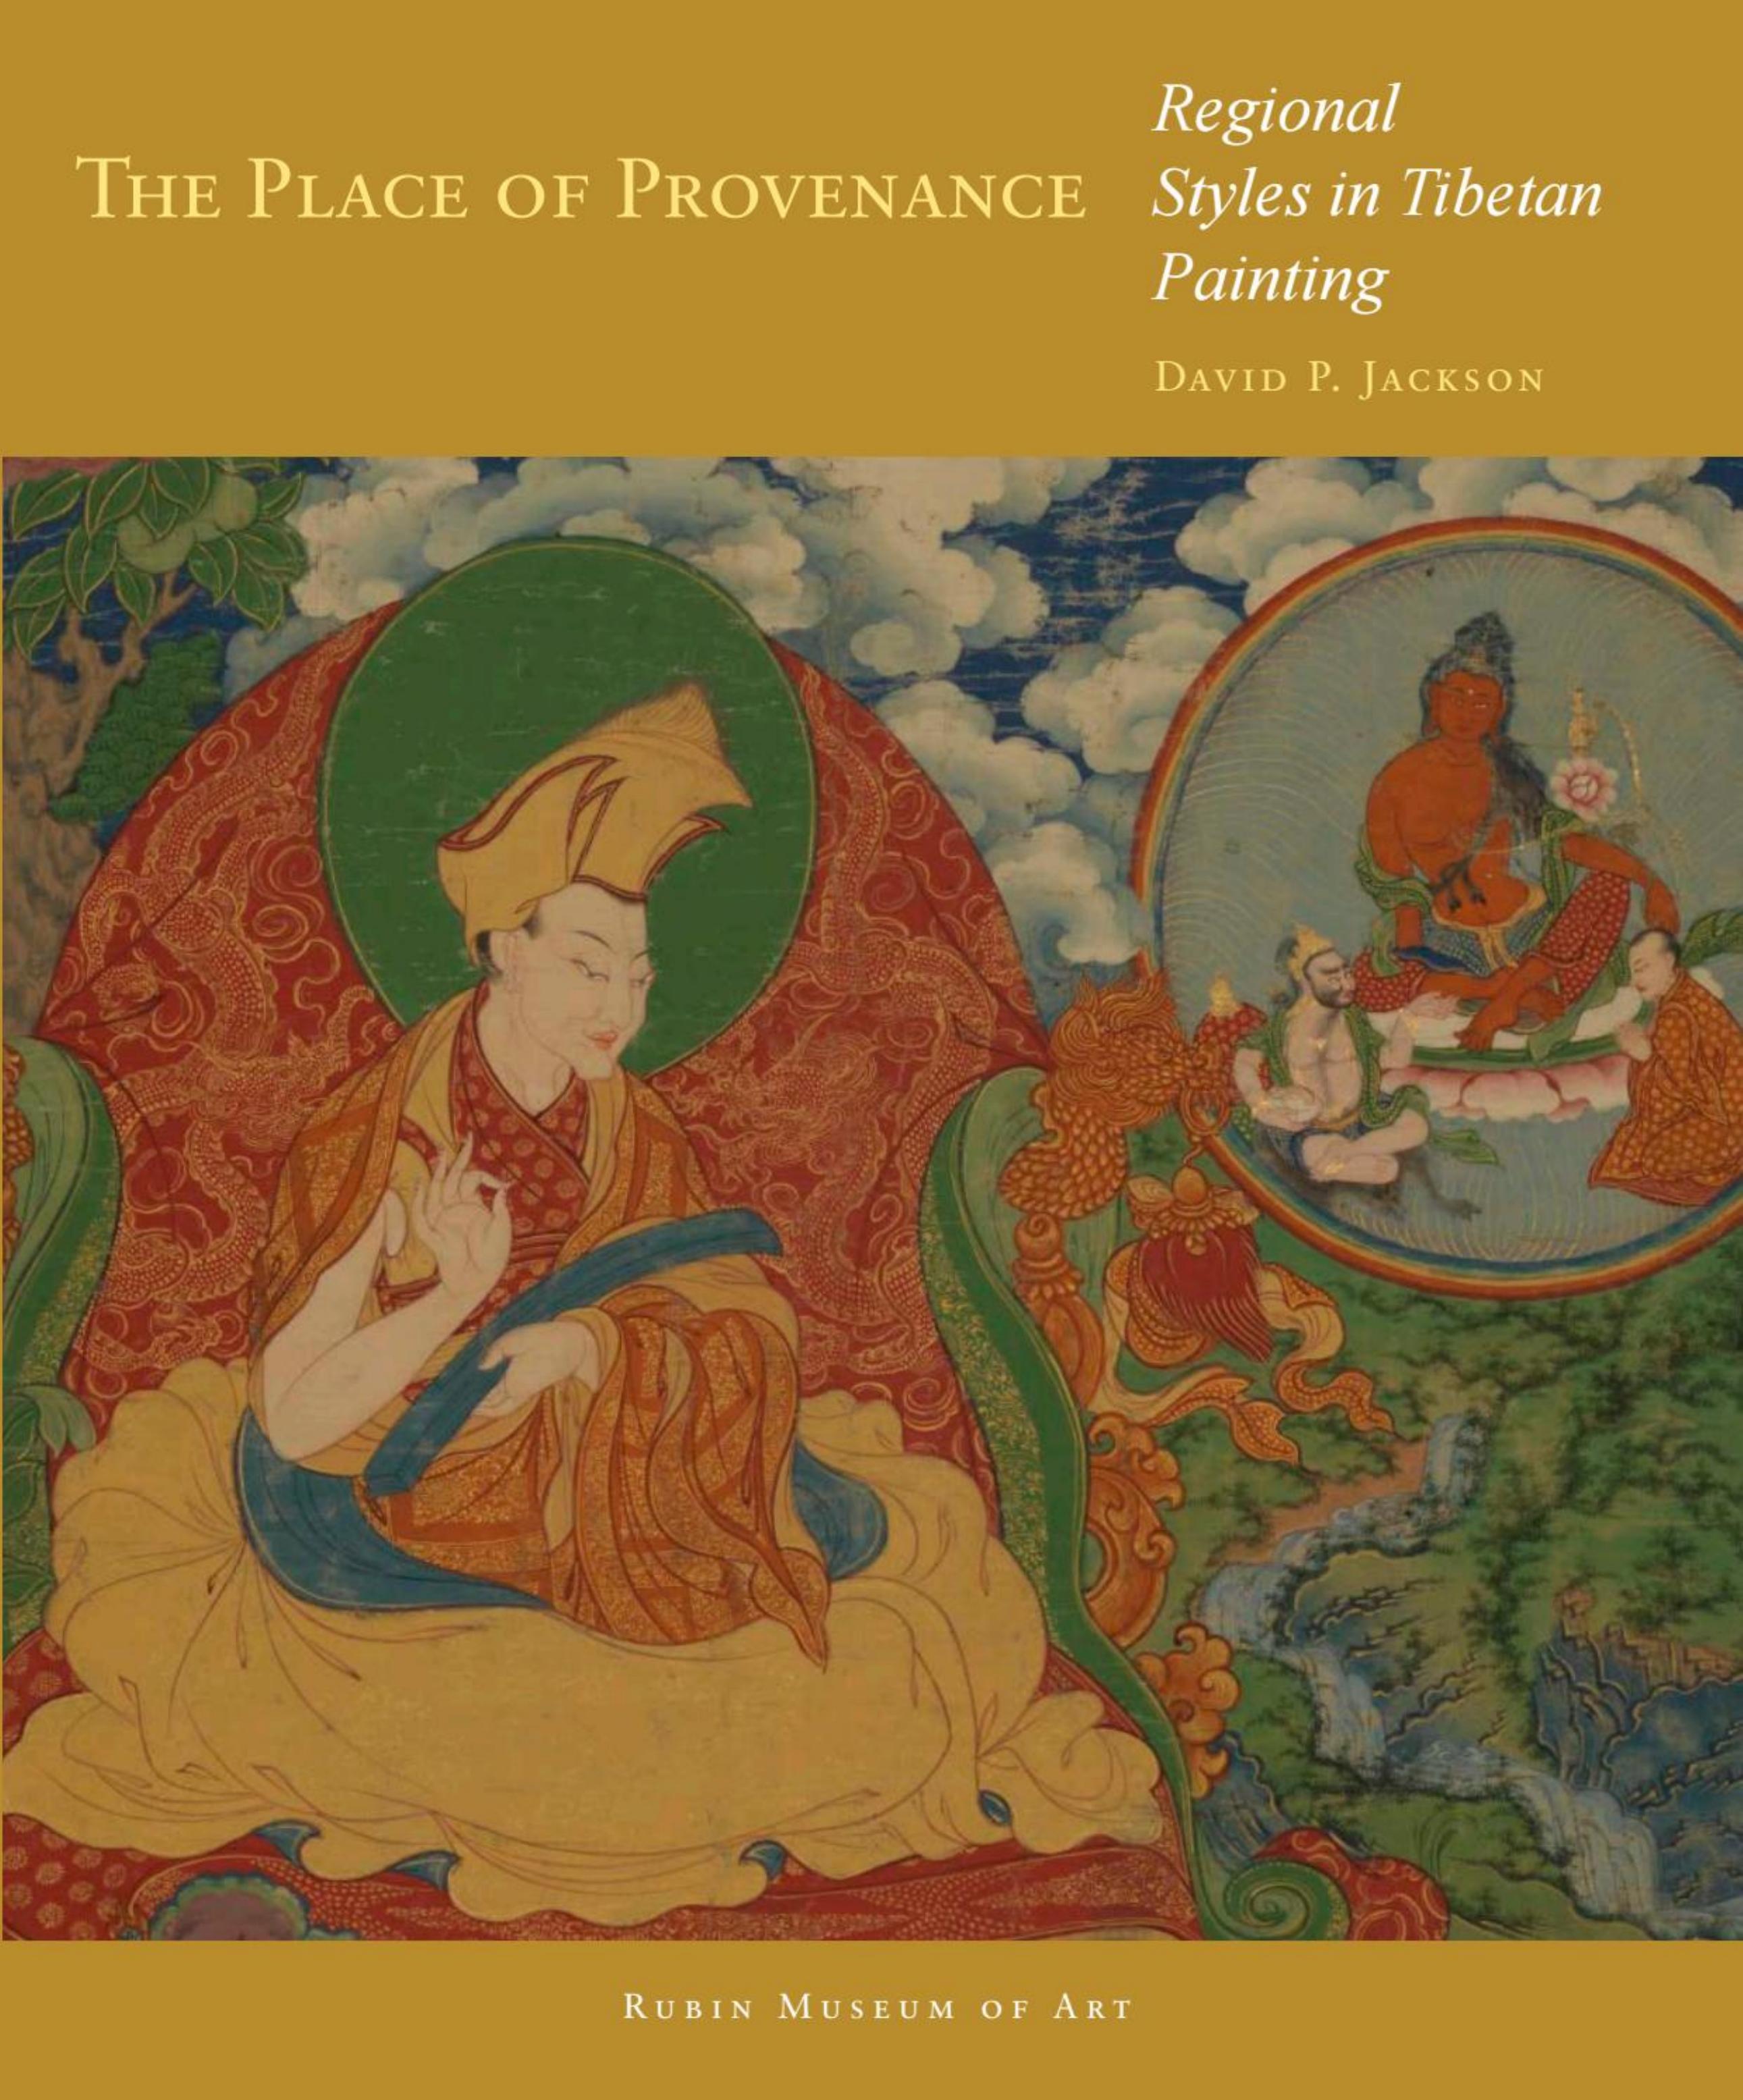 The Place of Provenance: Regional Styles in Tibetan Painting by David Jackson